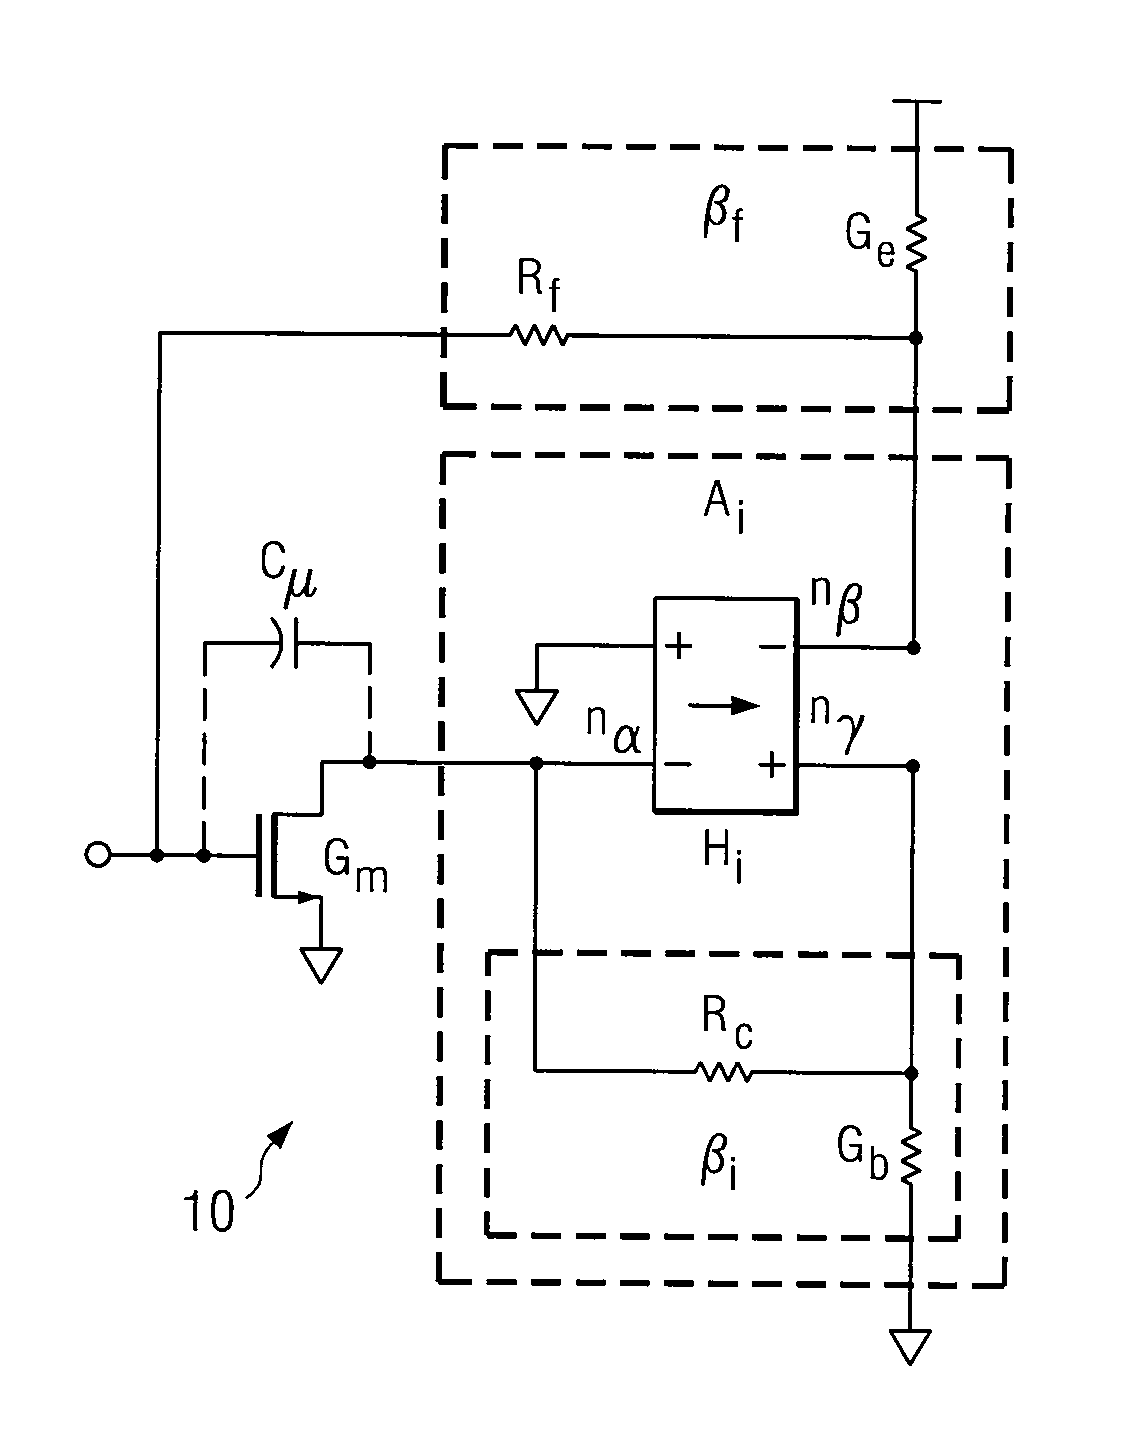 System and method for providing a configurable inductor less multi-stage low-noise amplifier